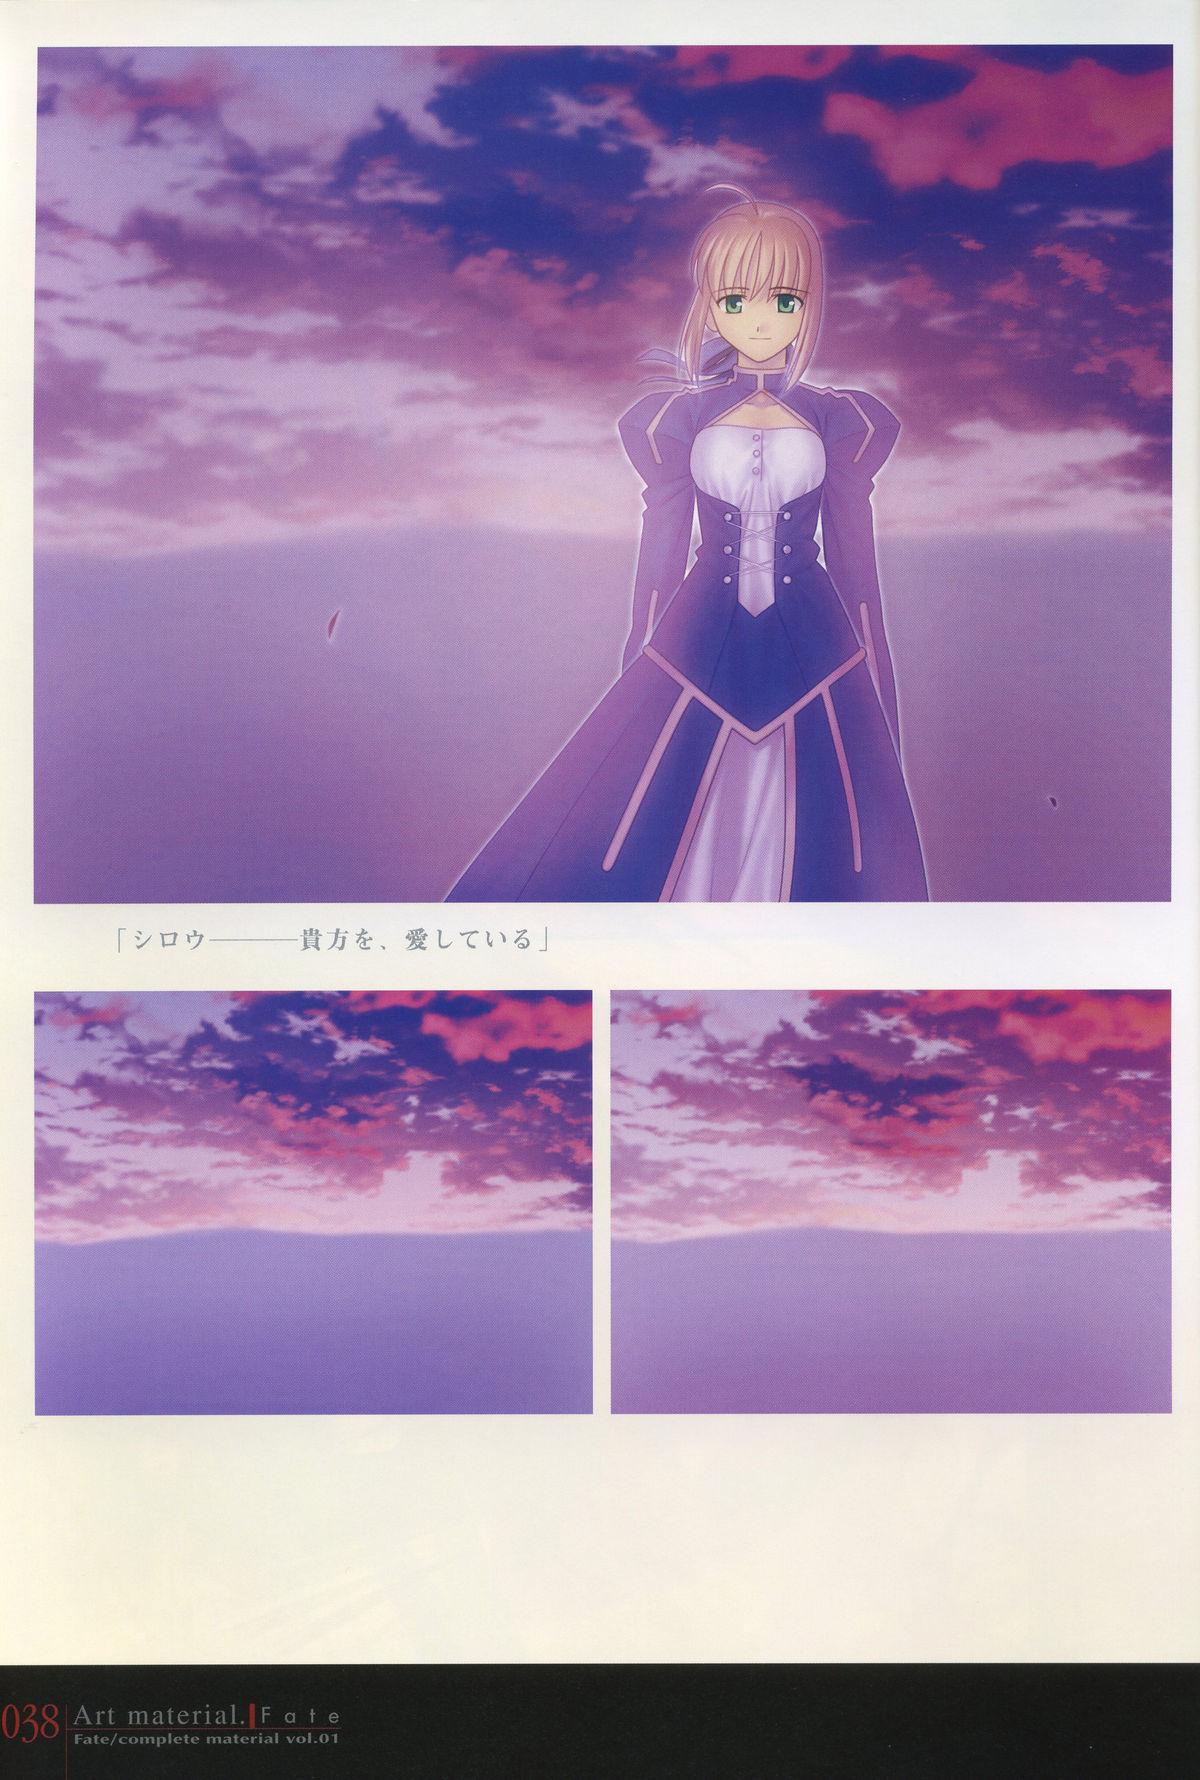 Fate/complete material I - Art material. 42